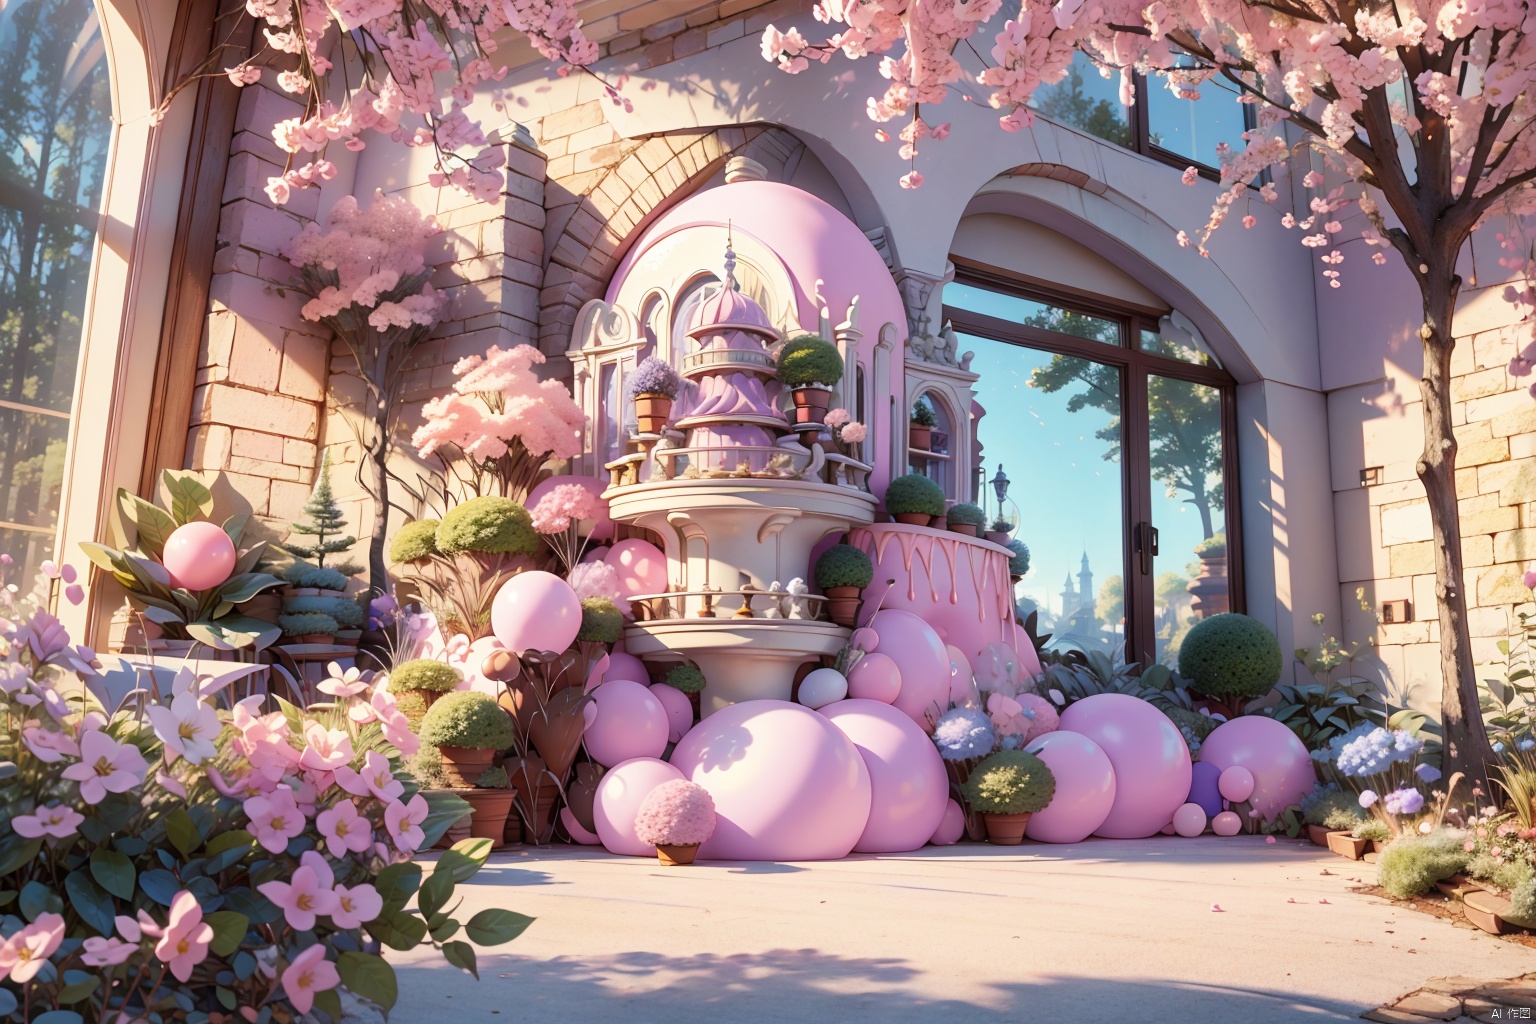 Dream, cake castle, (pink, purple, white), brick-like texture design, chocolate chips, icing, chocolate chains, exquisite windows and doors, beautiful textures, gardens, trees, shrubs, 8k, high quality, top CG, highest picture quality, best work, movie lighting, cool lighting effects, special effects, masterpieces, best quality, extreme details, illustrations, ultra-high definition, ultra-fine sections, 8k resolution, ultra-high resolution, best picture quality, high detail, master level, detail level